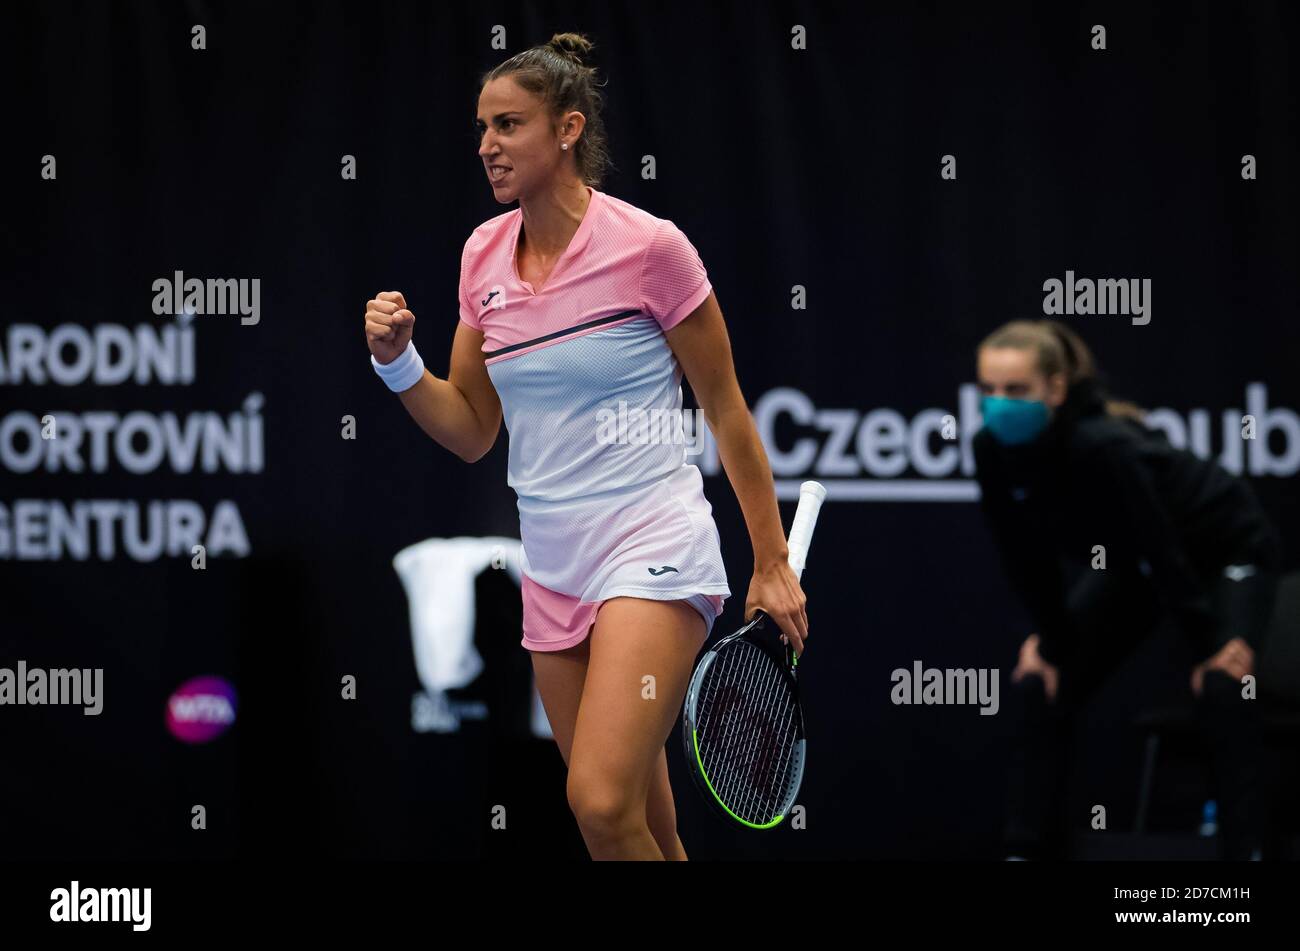 ara Sorribes Tormo of Spain in action against Anett Kontaveit of Estonia during the second round at the 2020 J&T Banka Ostrava Open WTA Premier tenni Stock Photo